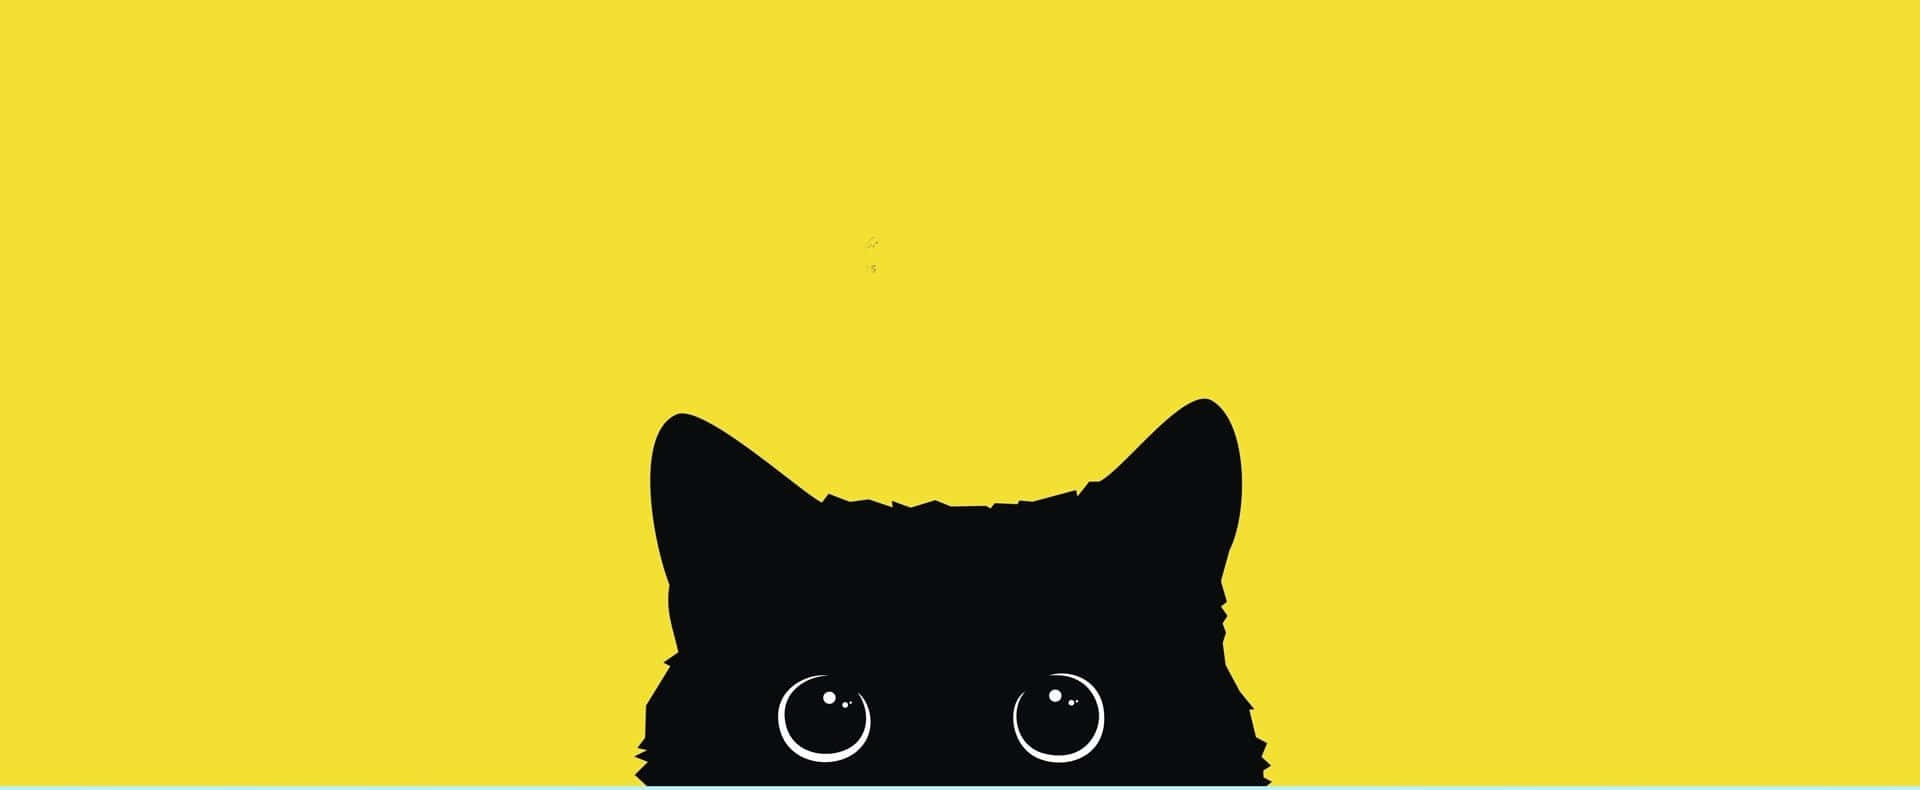 Download A Black Cat With Eyes On A Yellow Background Wallpaper ...